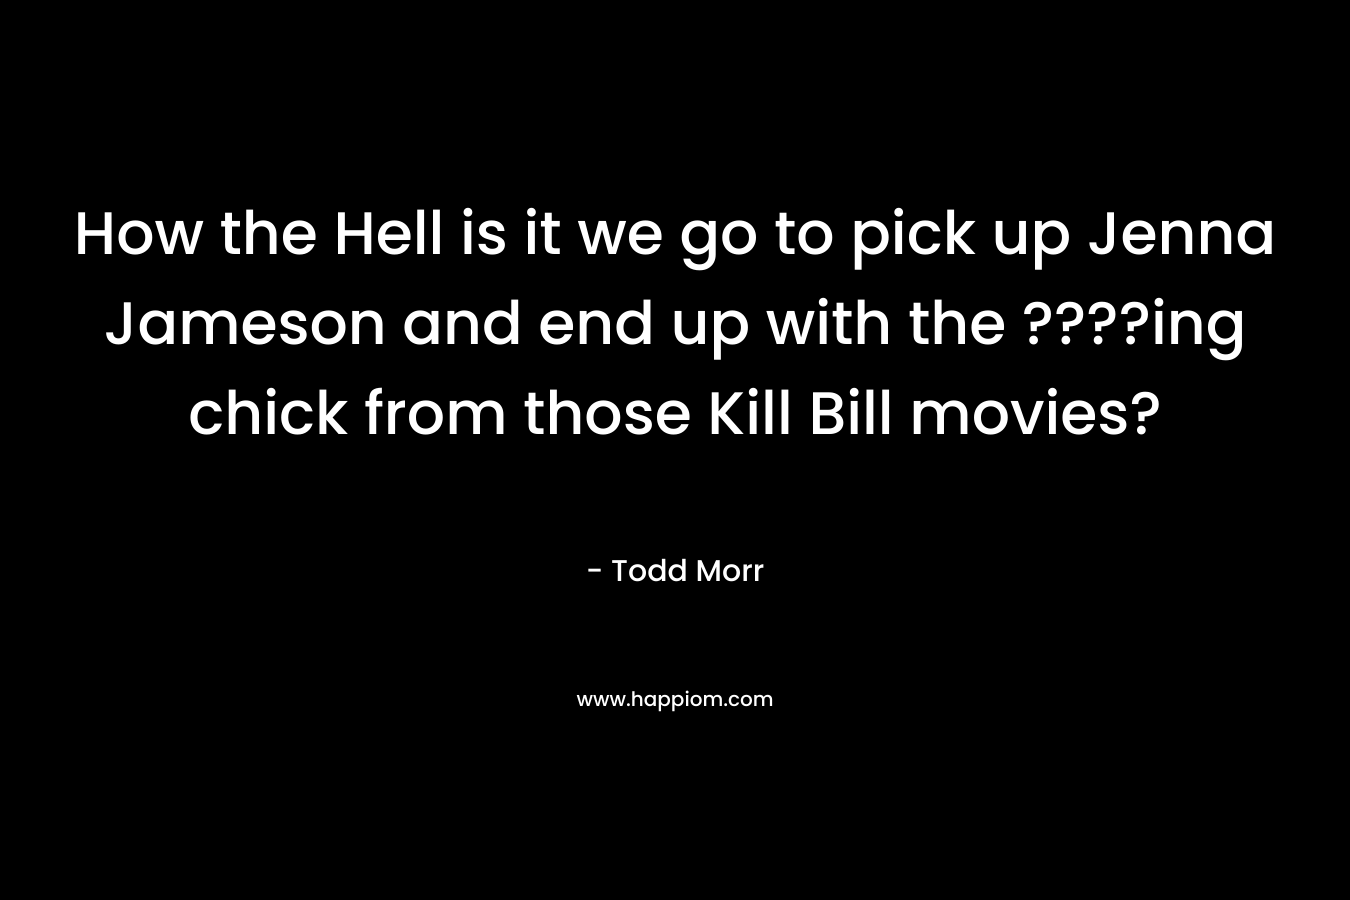 How the Hell is it we go to pick up Jenna Jameson and end up with the ????ing chick from those Kill Bill movies? – Todd Morr